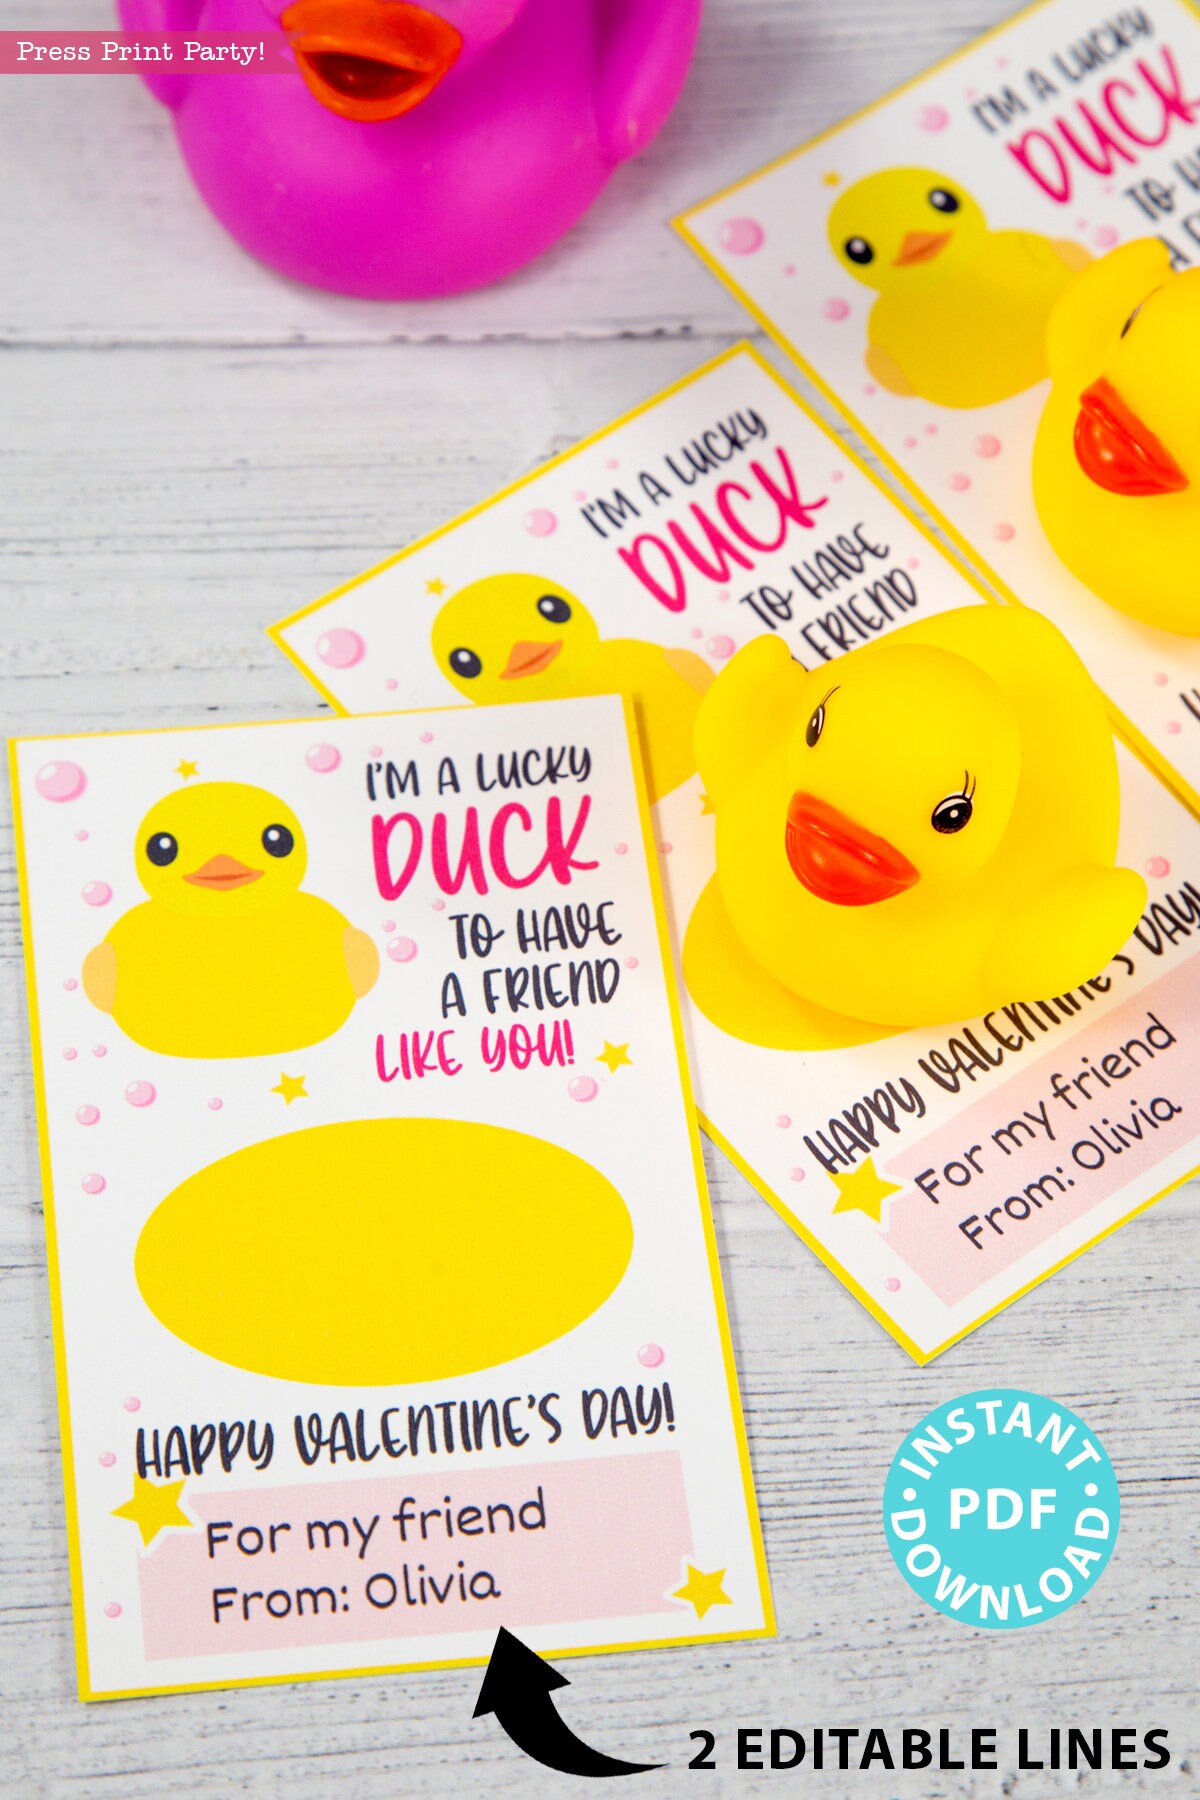 Paper duck 💞 Colour: Yellow, blue, pink, and white Can play with 3 of your  friends ☺